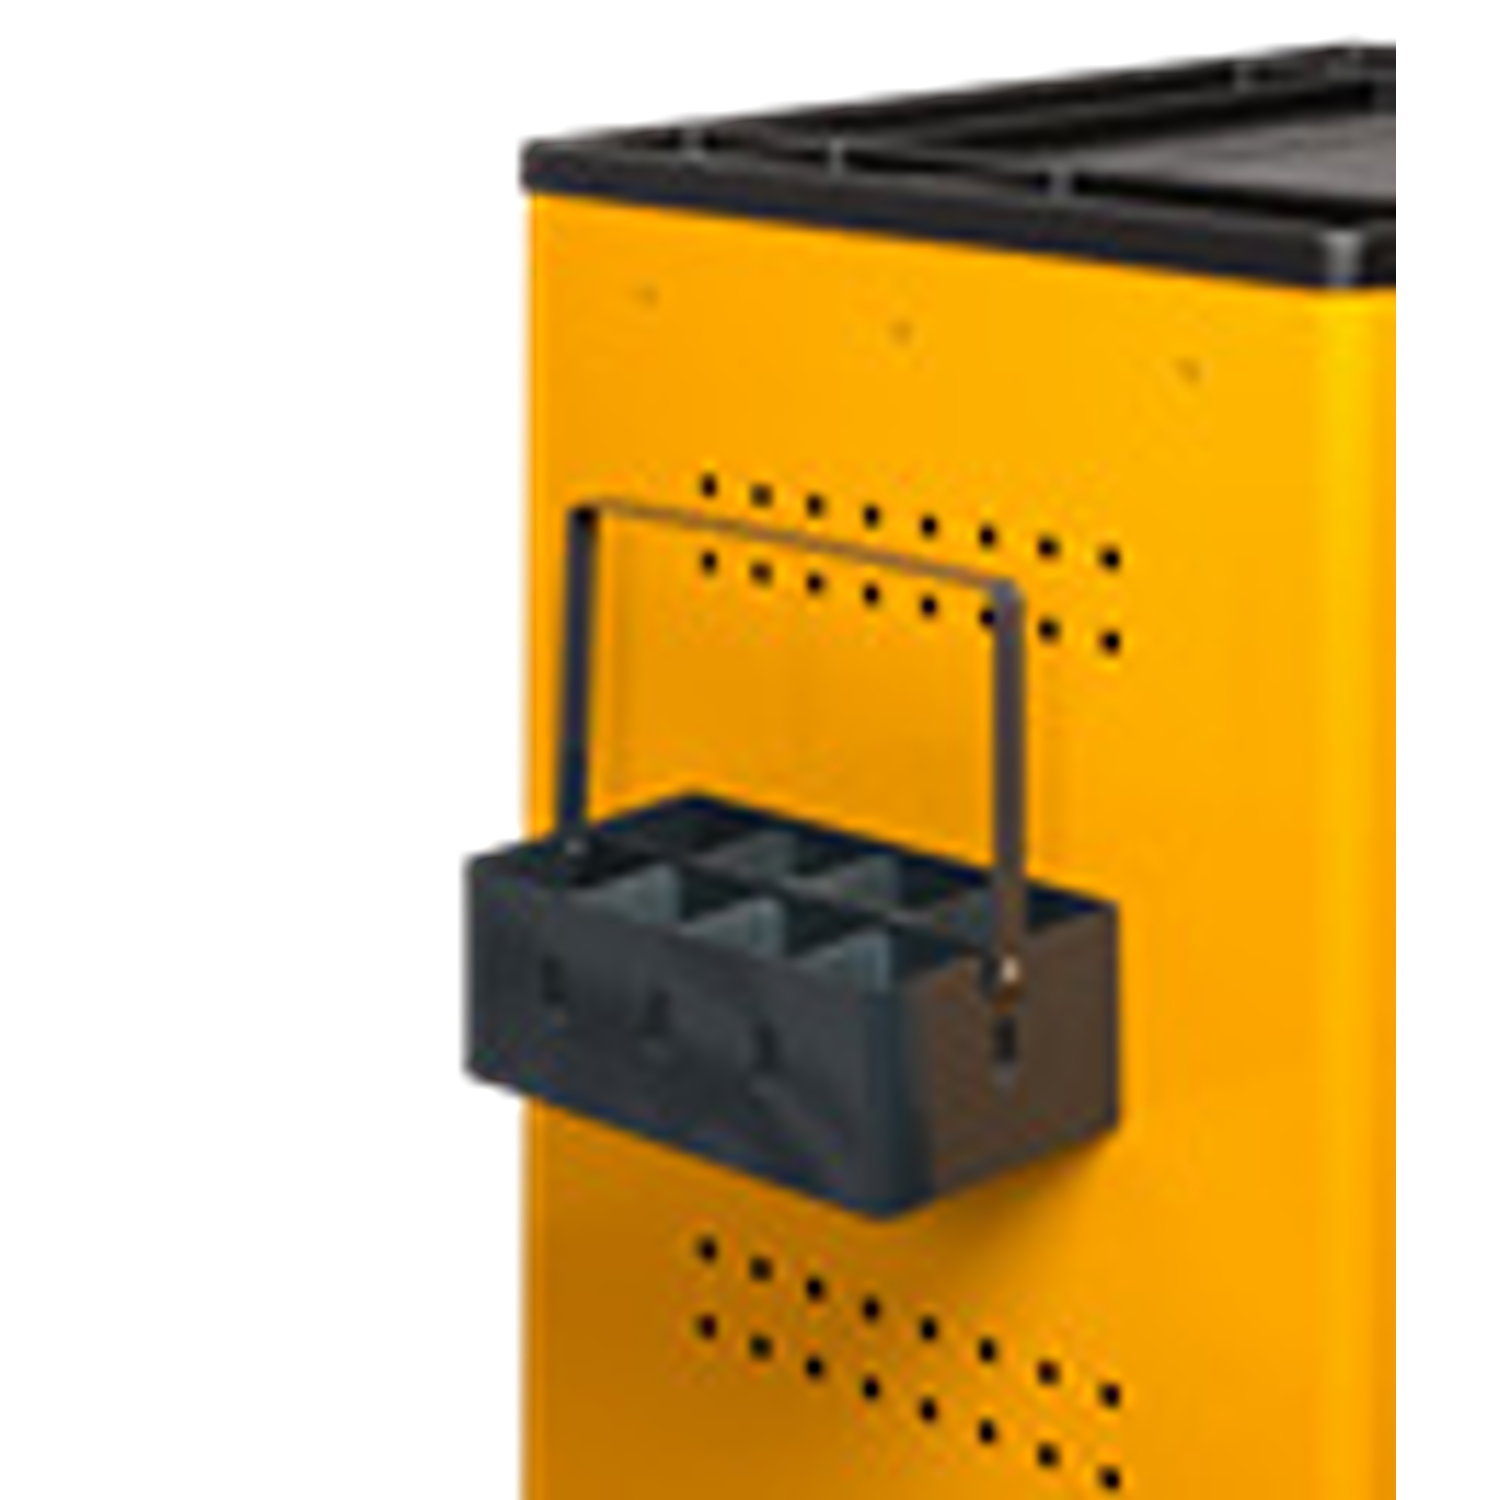 ELORA 1220-DH Accessories Roller Tool Cabinet (ELORA Tools) - Premium Roller Tool Cabinet from ELORA - Shop now at Yew Aik.